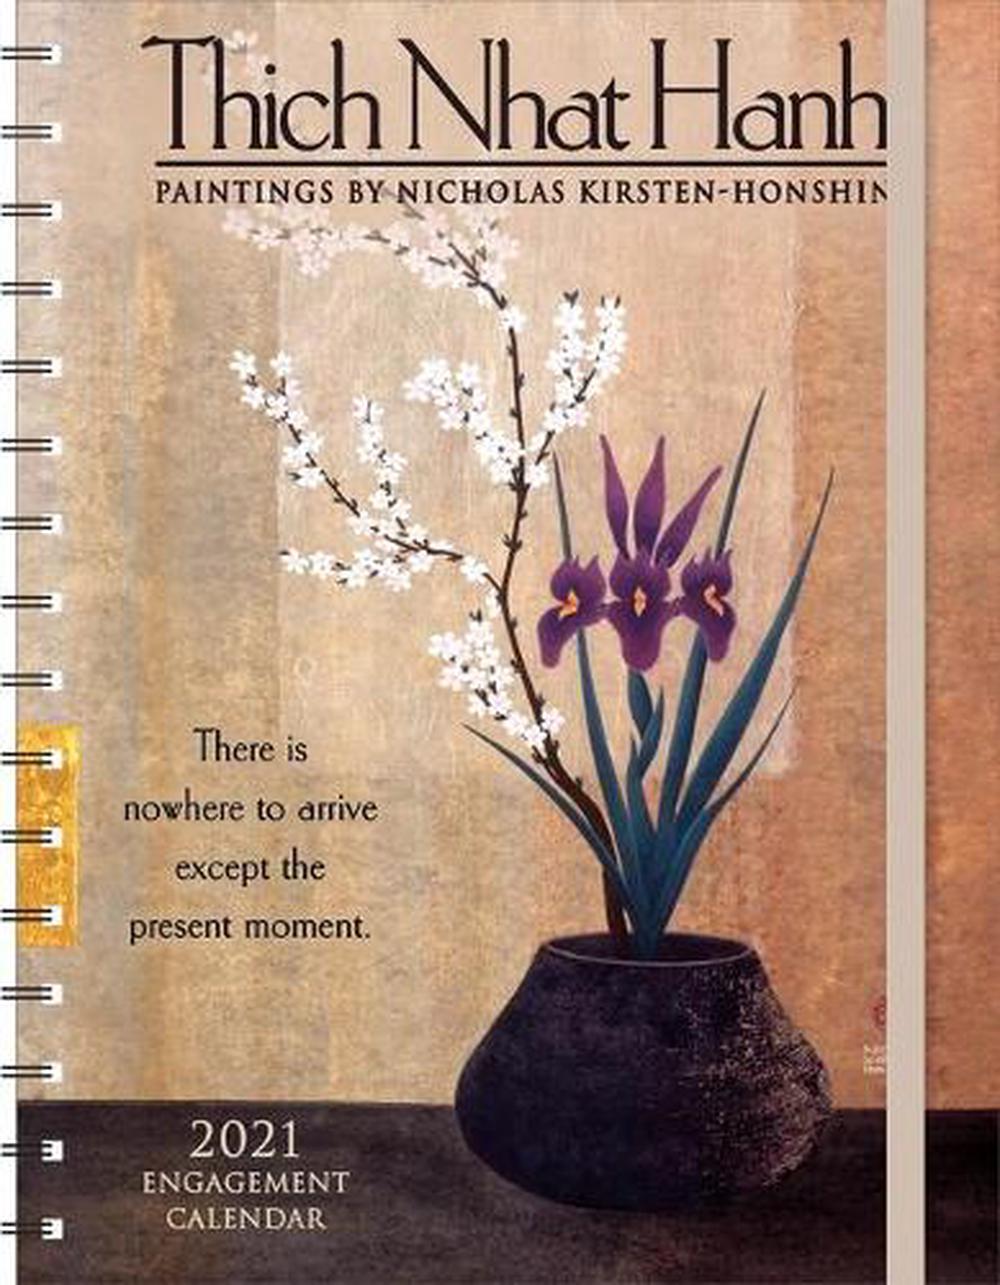 thich-nhat-hanh-2021-engagement-calendar-paintings-by-nicholas-kirsten